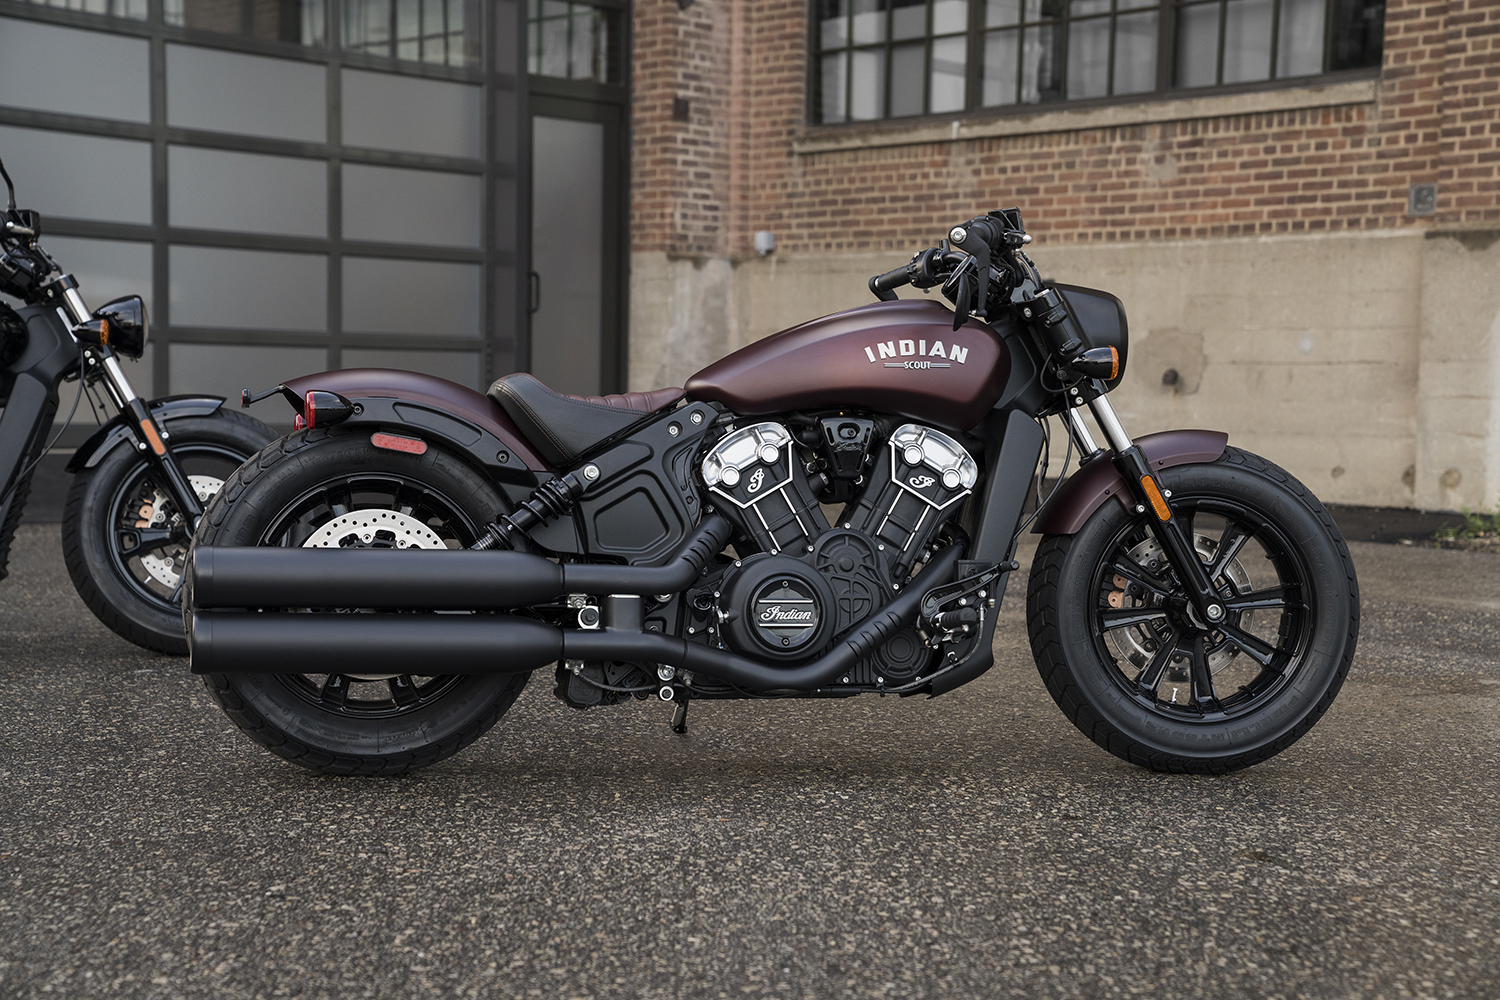 2022 Indian Motorcycle Lineup, First Look Review